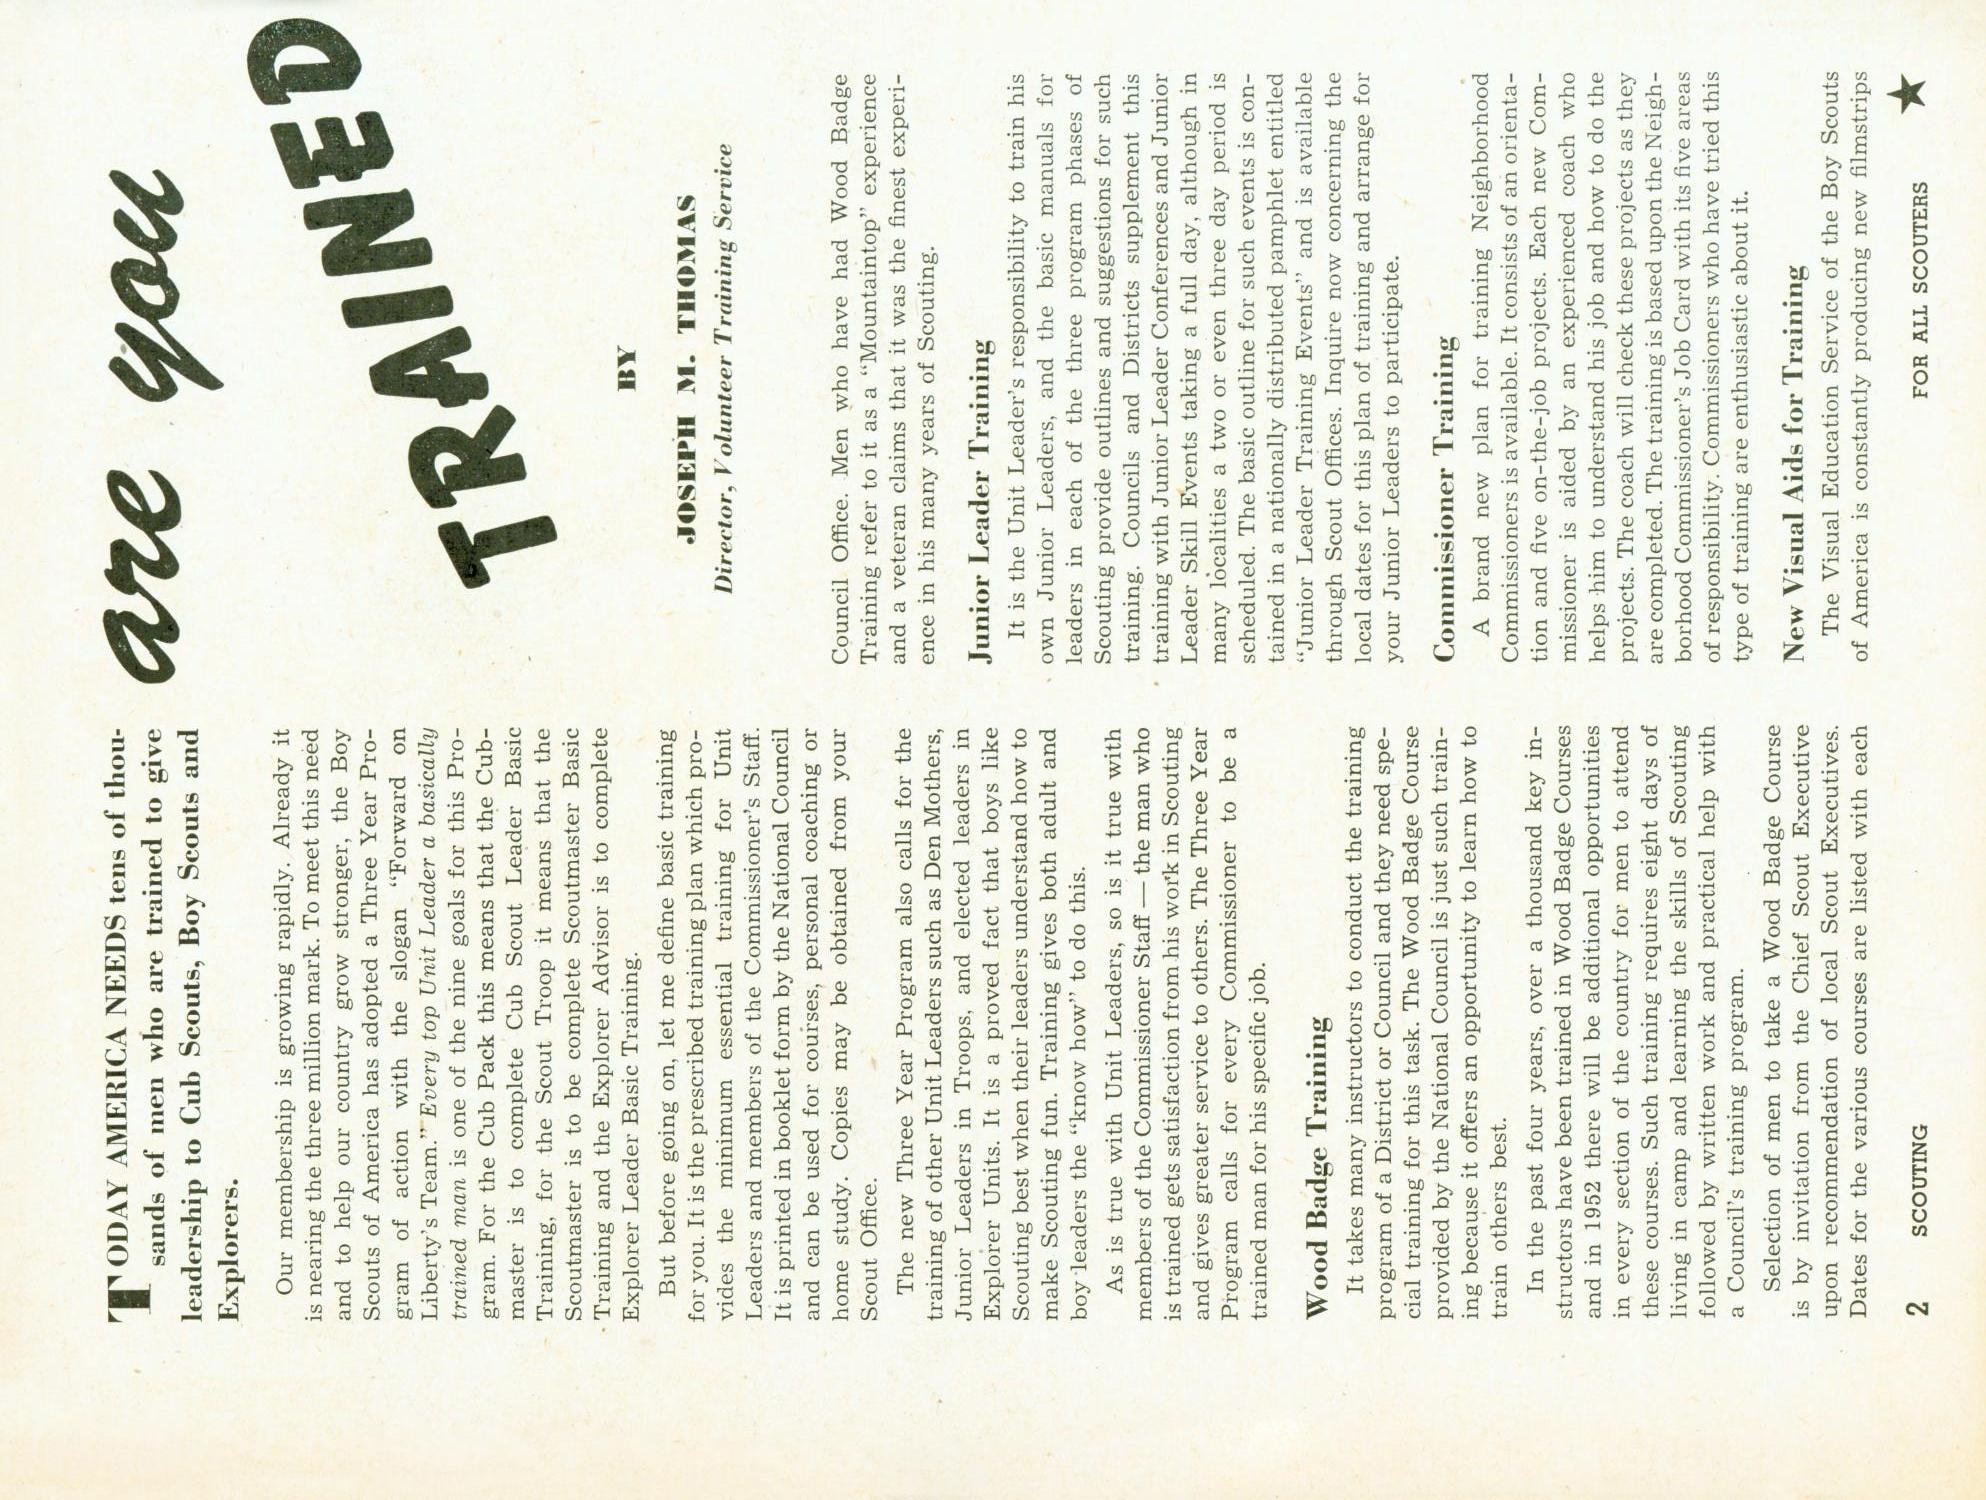 Scouting, Volume 40, Number 1, January 1952
                                                
                                                    2
                                                